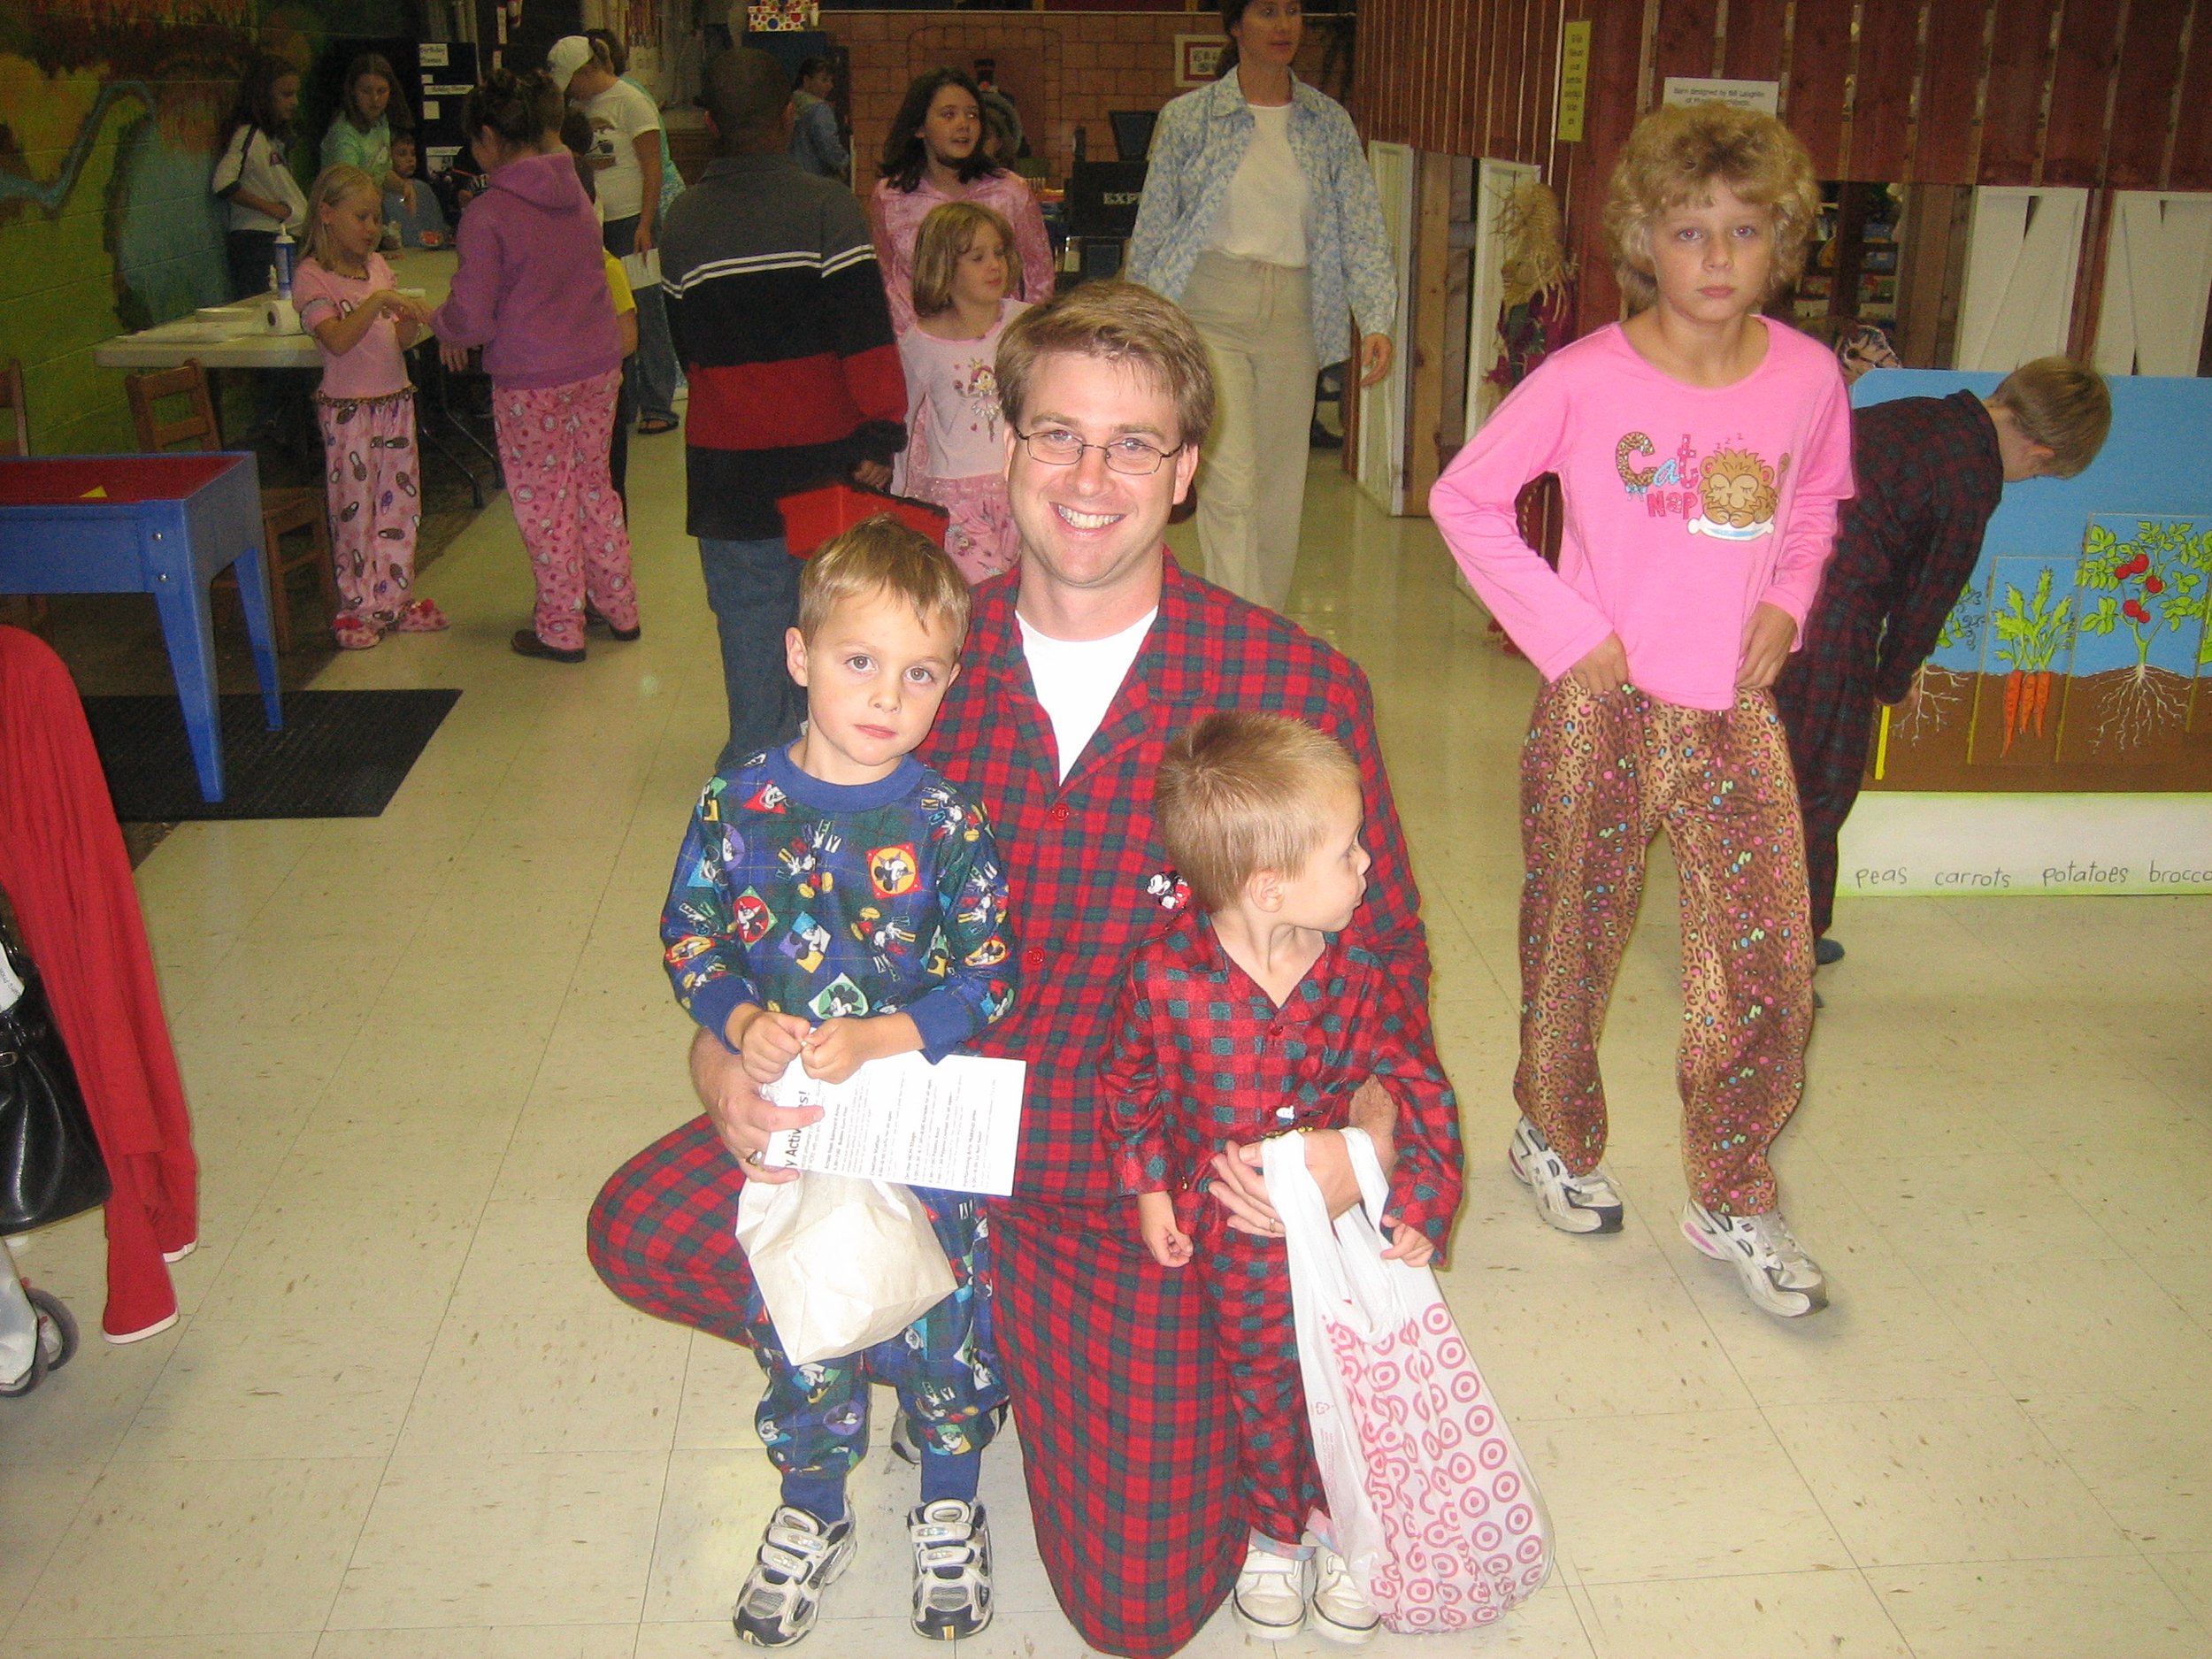  Our second birthday was full of Pajama Party fun! 